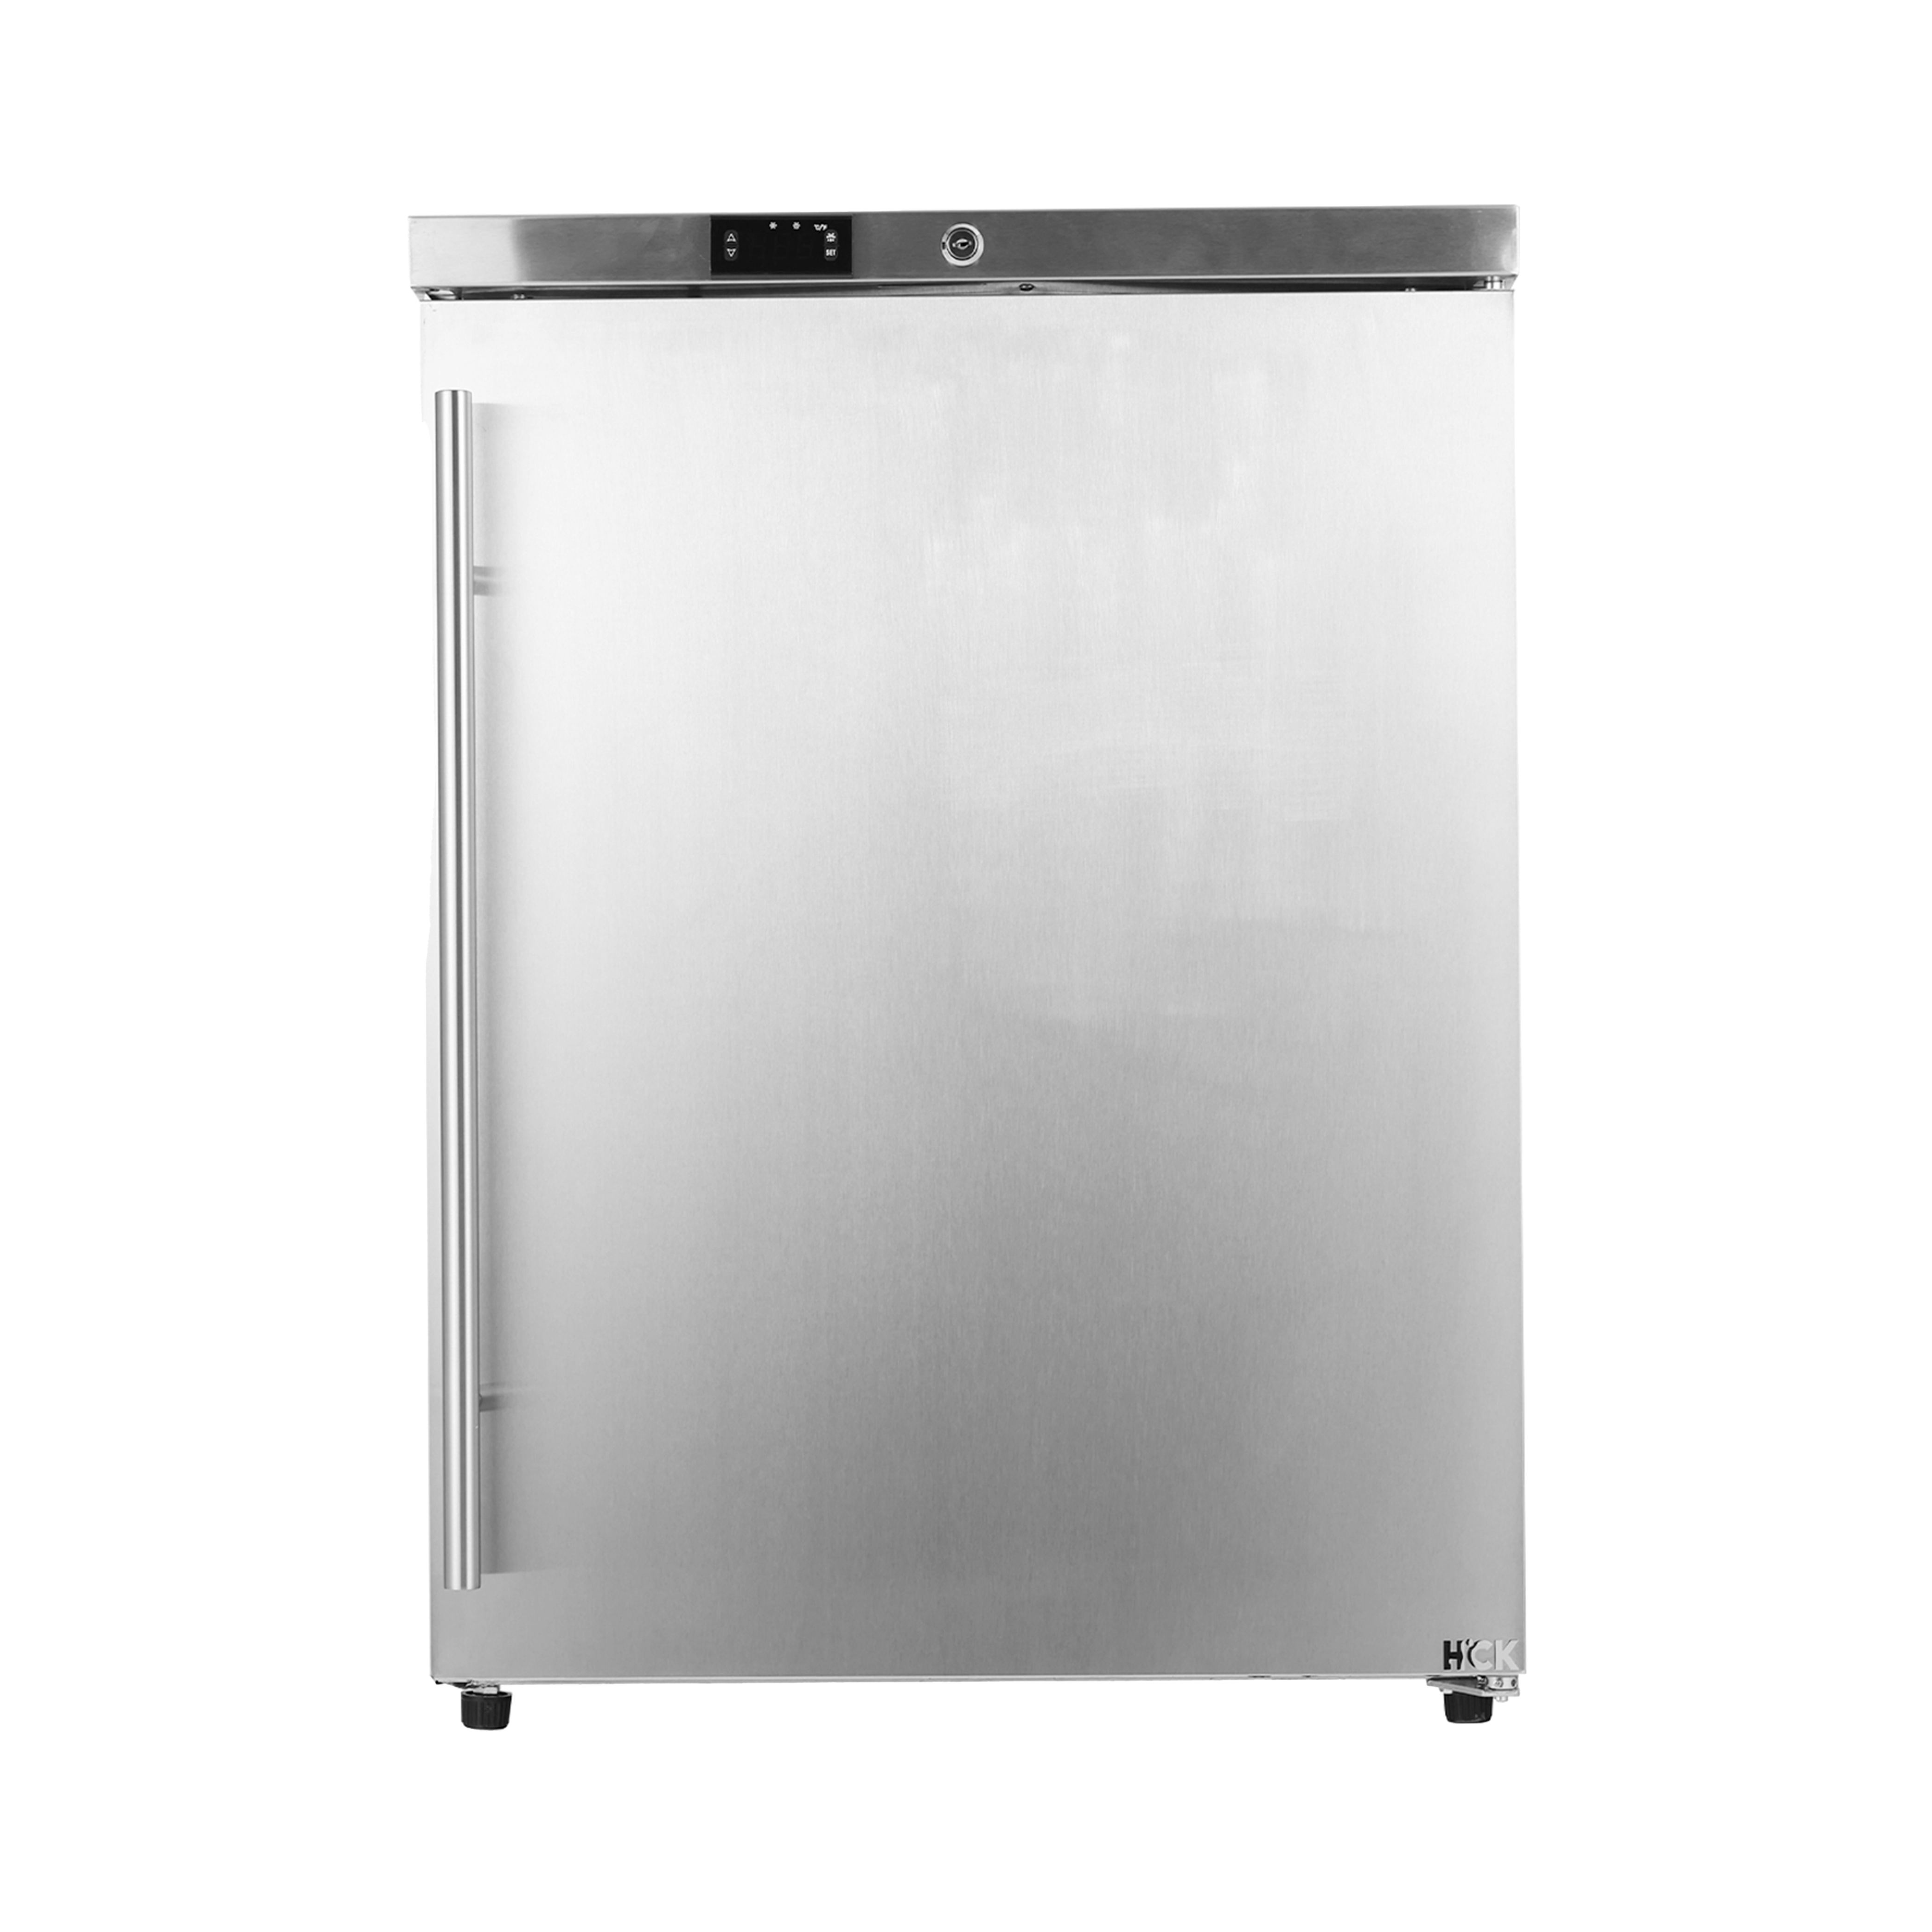 Front view of a 5.4 Cu Ft Stainless Steel Undercounter Outdoor Refrigerator